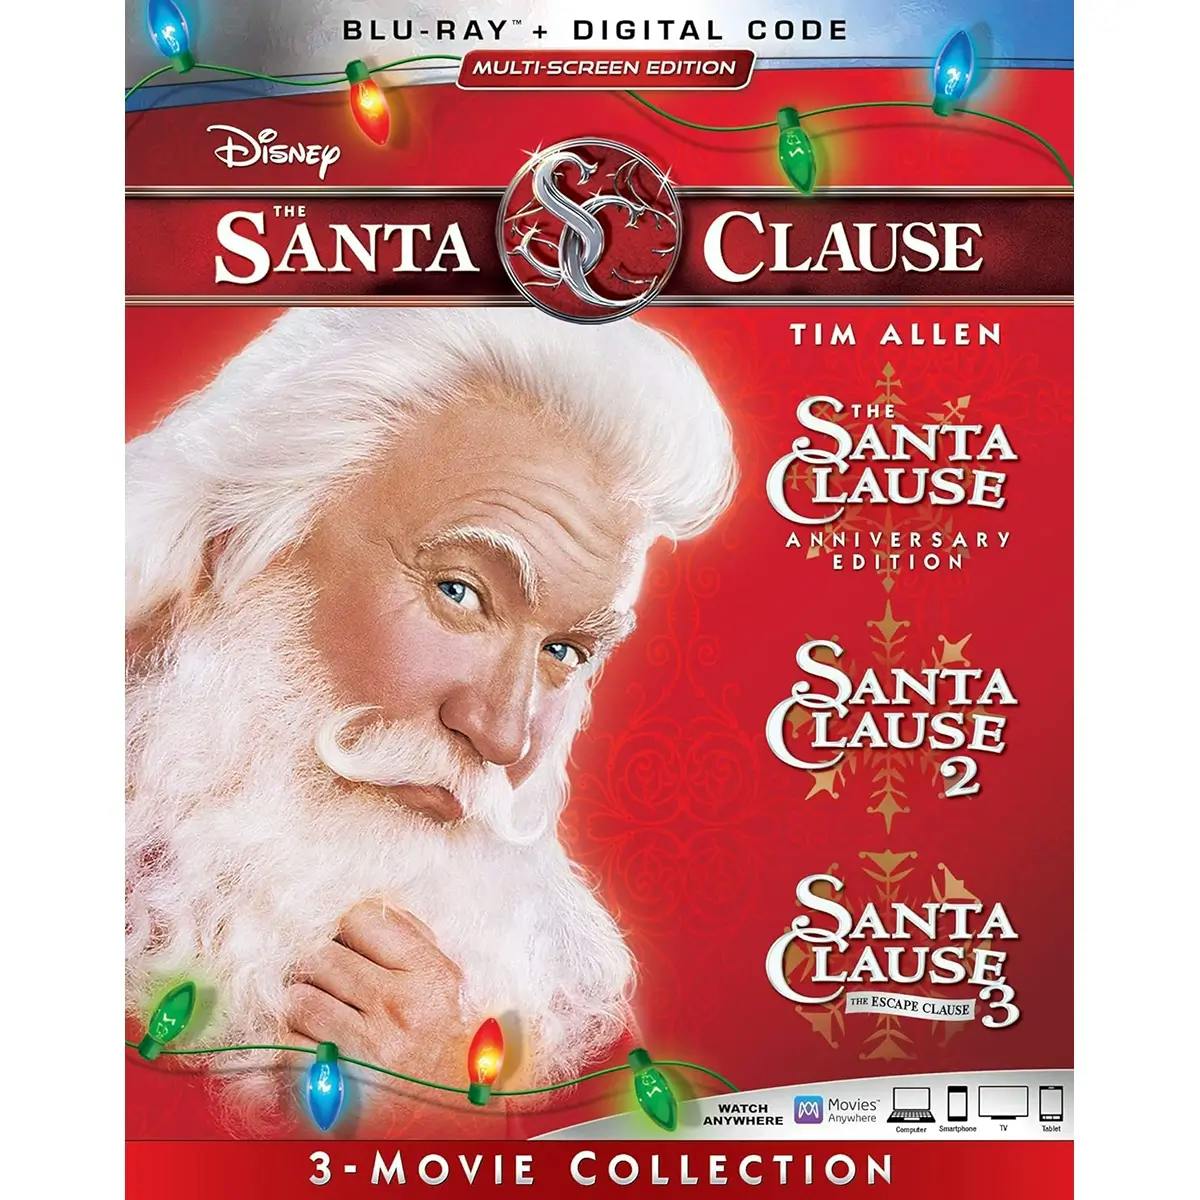 Box art for a Blu-ray containing all three “Santa Clause” movies.